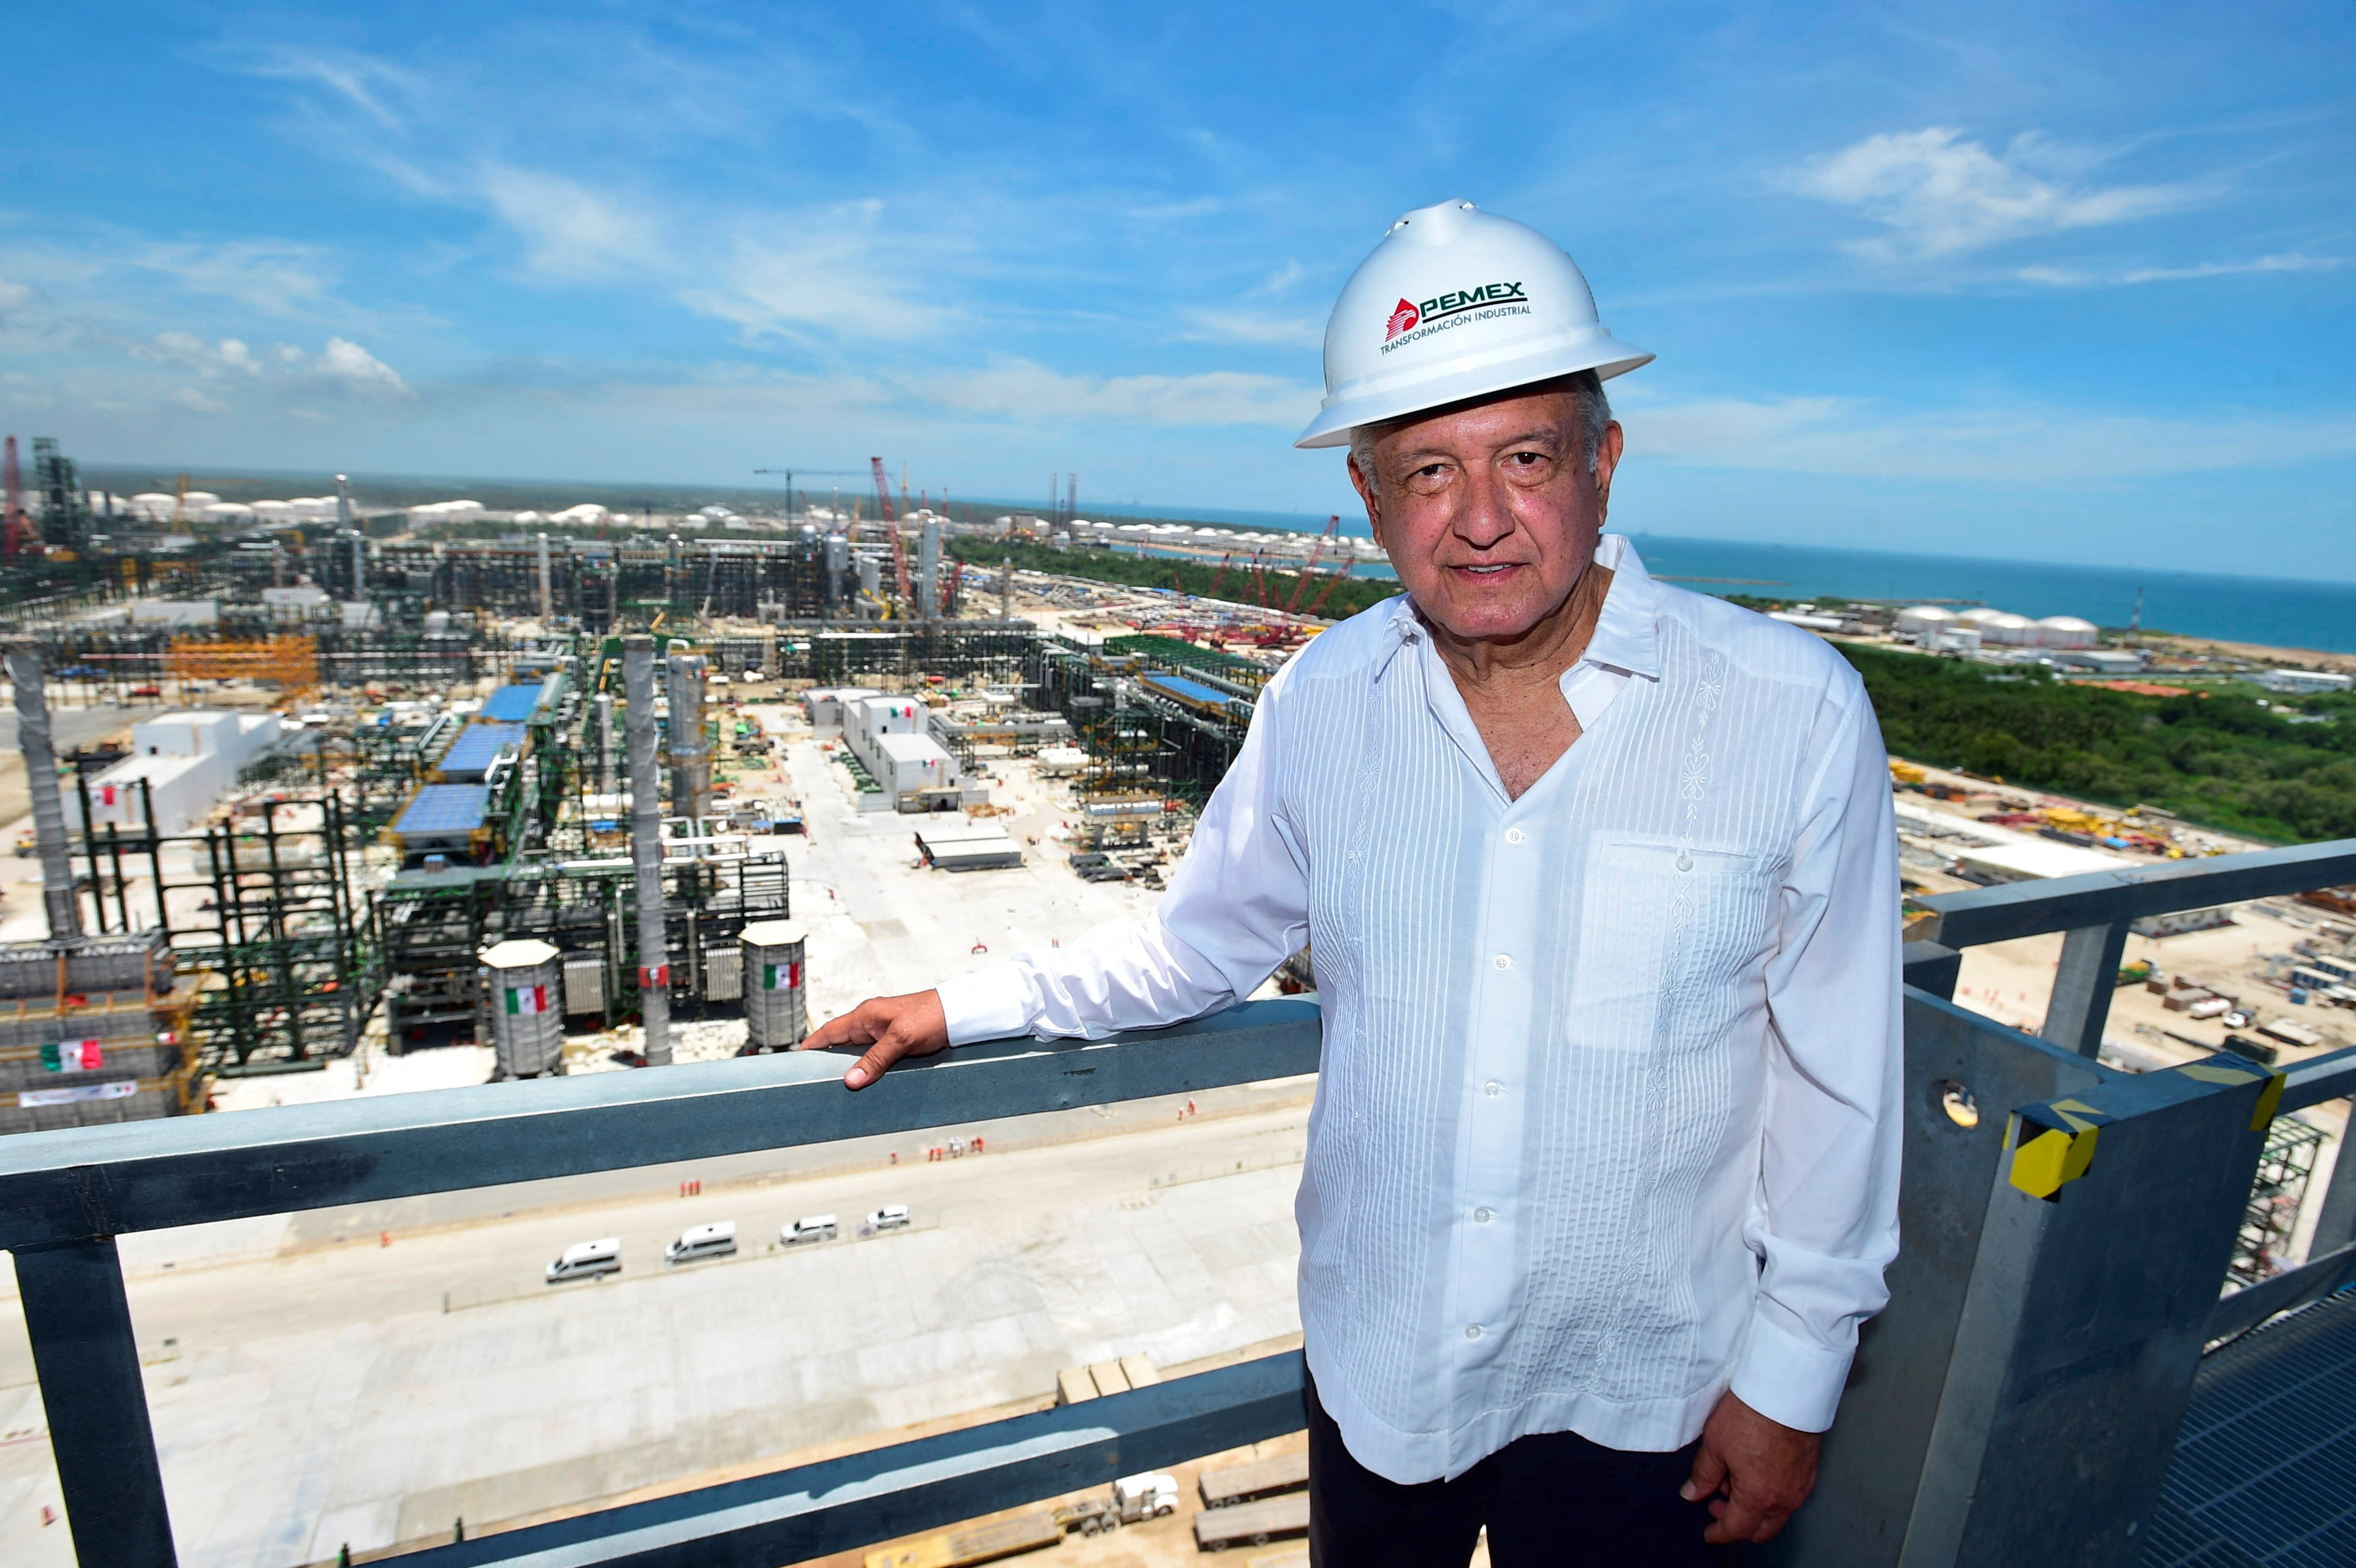 President López Obrador supervising the construction of the new Olmeca oil refinery, better known as "of mouths" (Photo: Reuters)